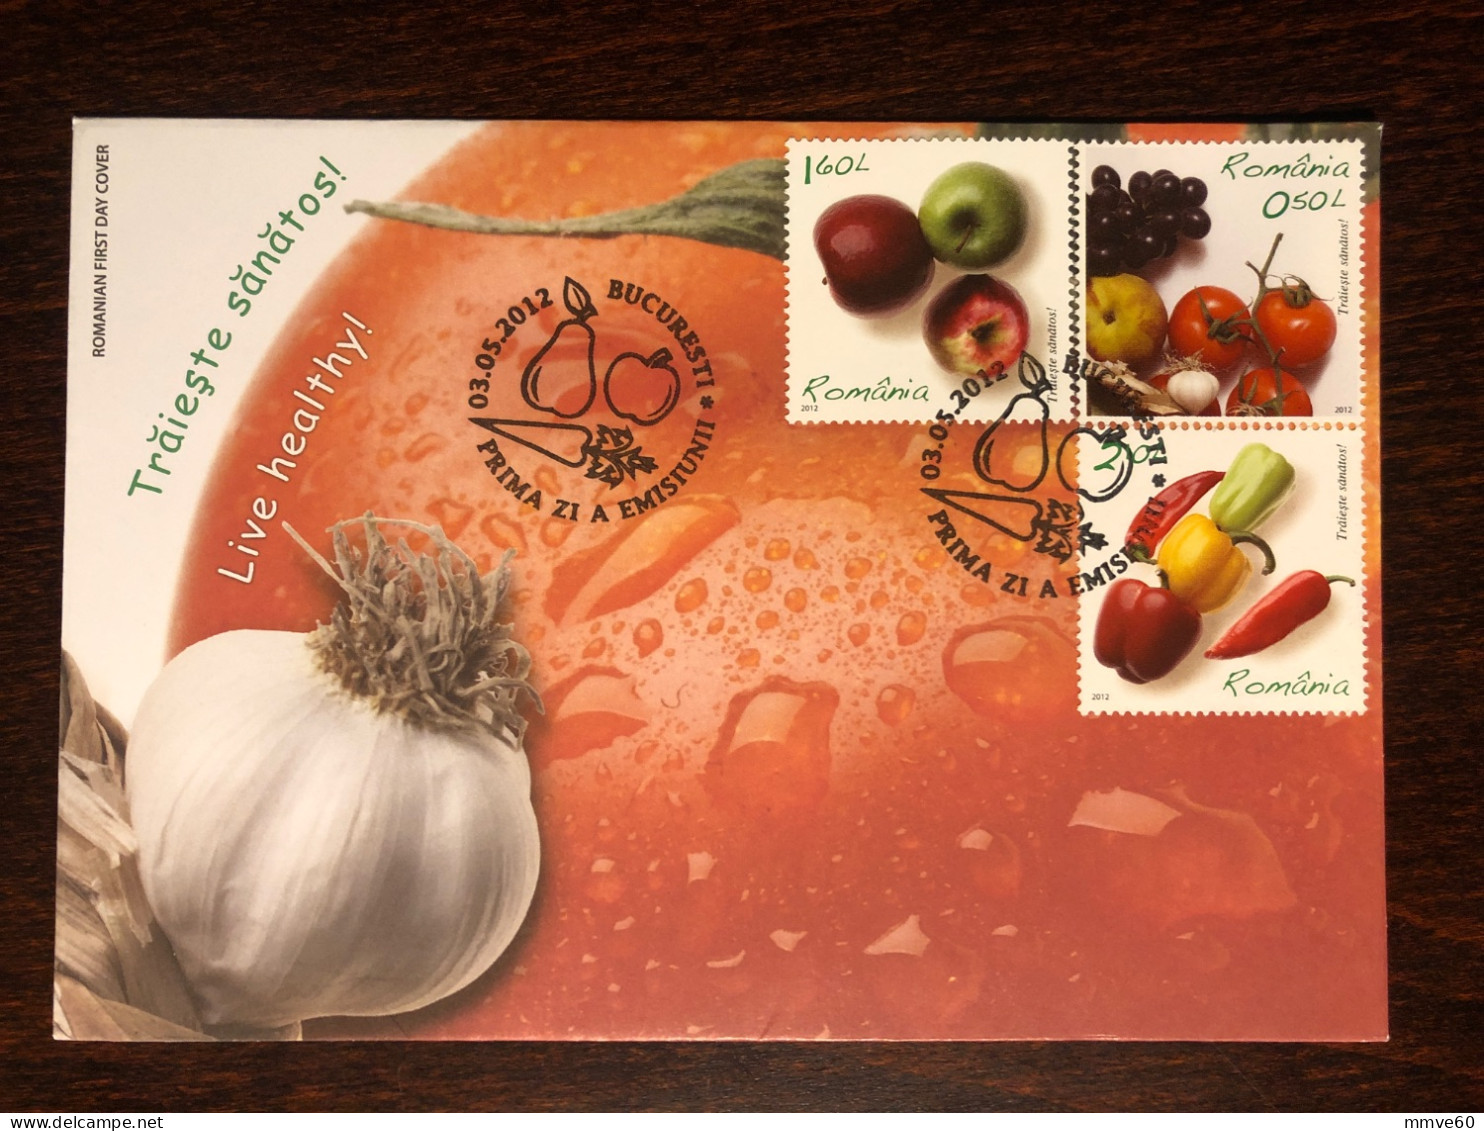 ROMANIA FDC COVER 2012 YEAR HEALTHY LIFE HEALTH MEDICINE STAMPS - FDC